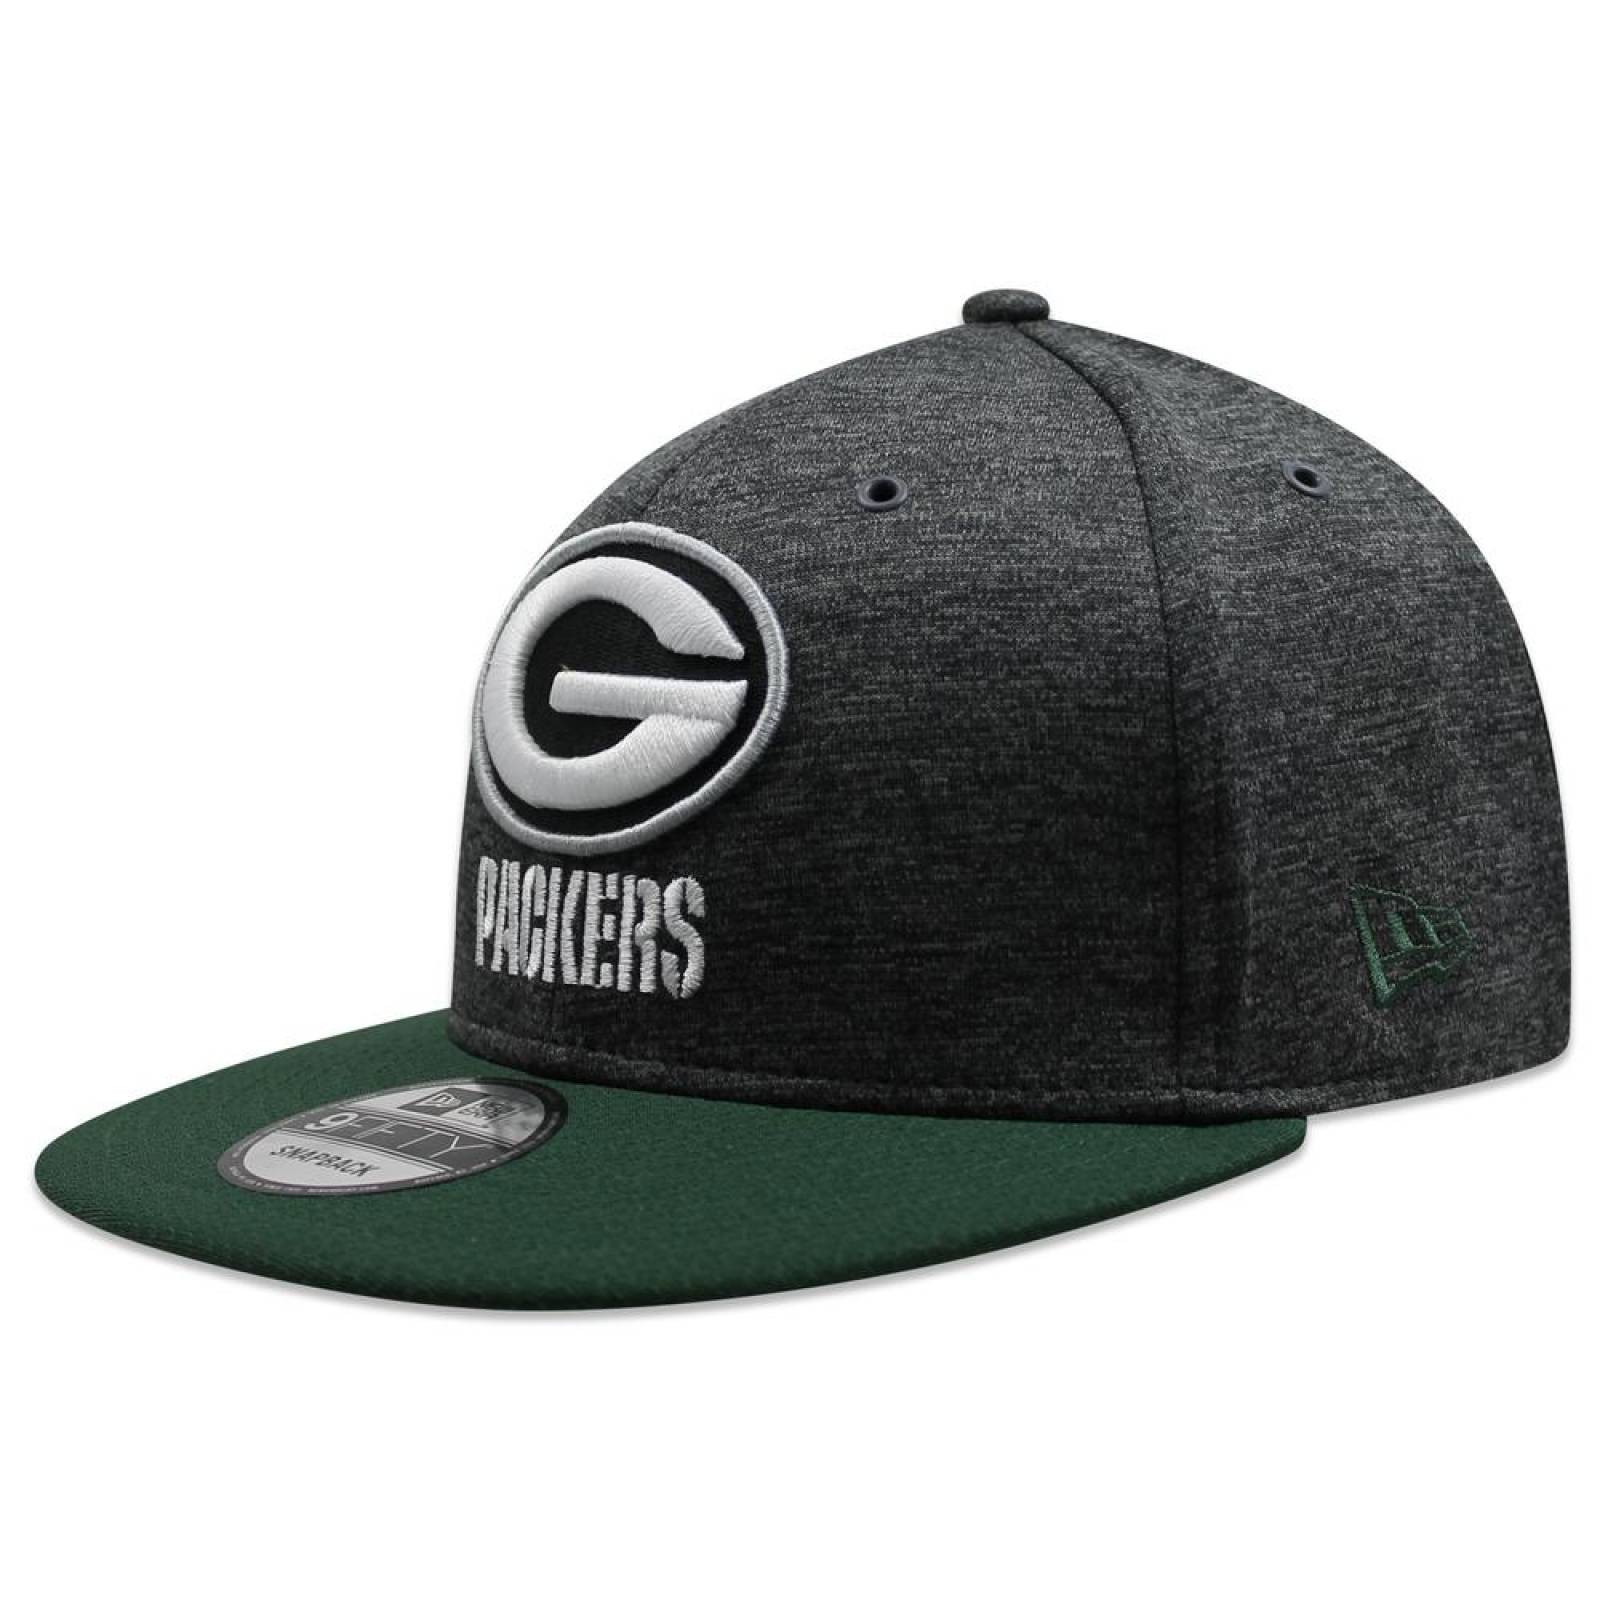 Gorra New Era 9 Fifty On Field 2018 Packers Sideline Defended Gris 